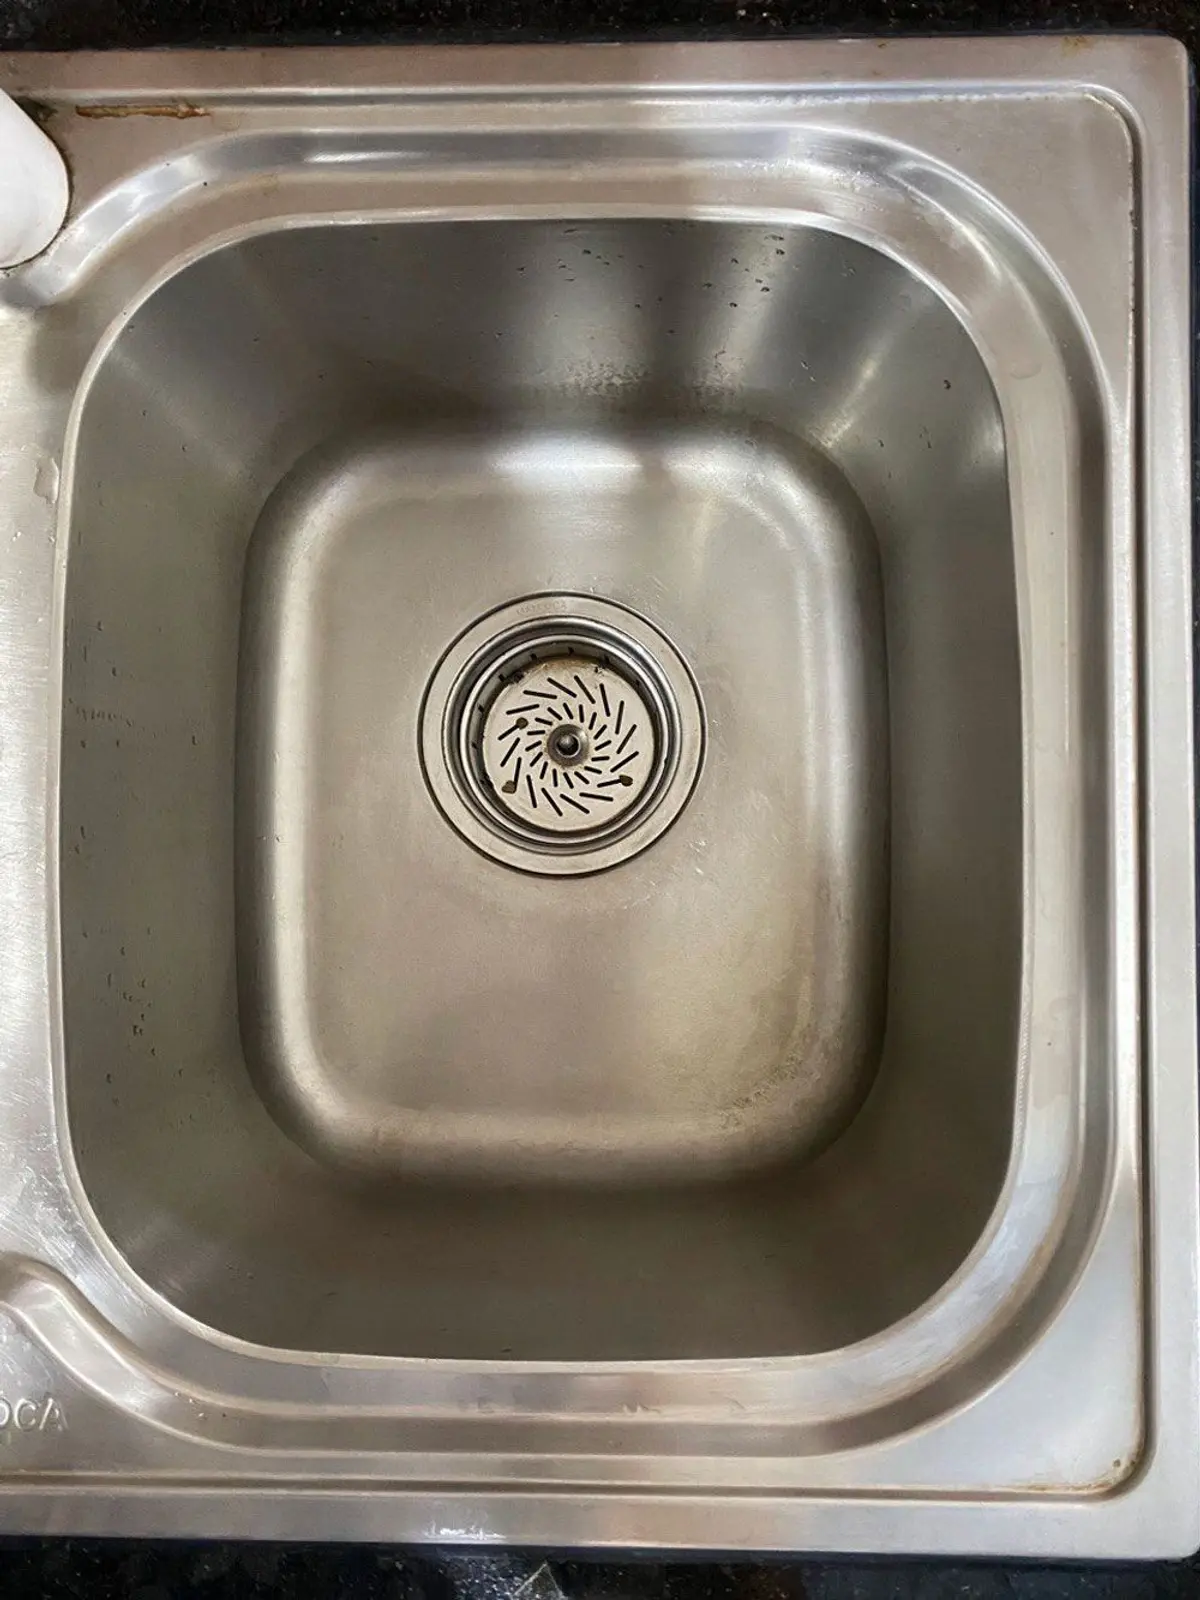 Before Cleaning the Stainless Steel Sink with Baking Soda and Vinegar